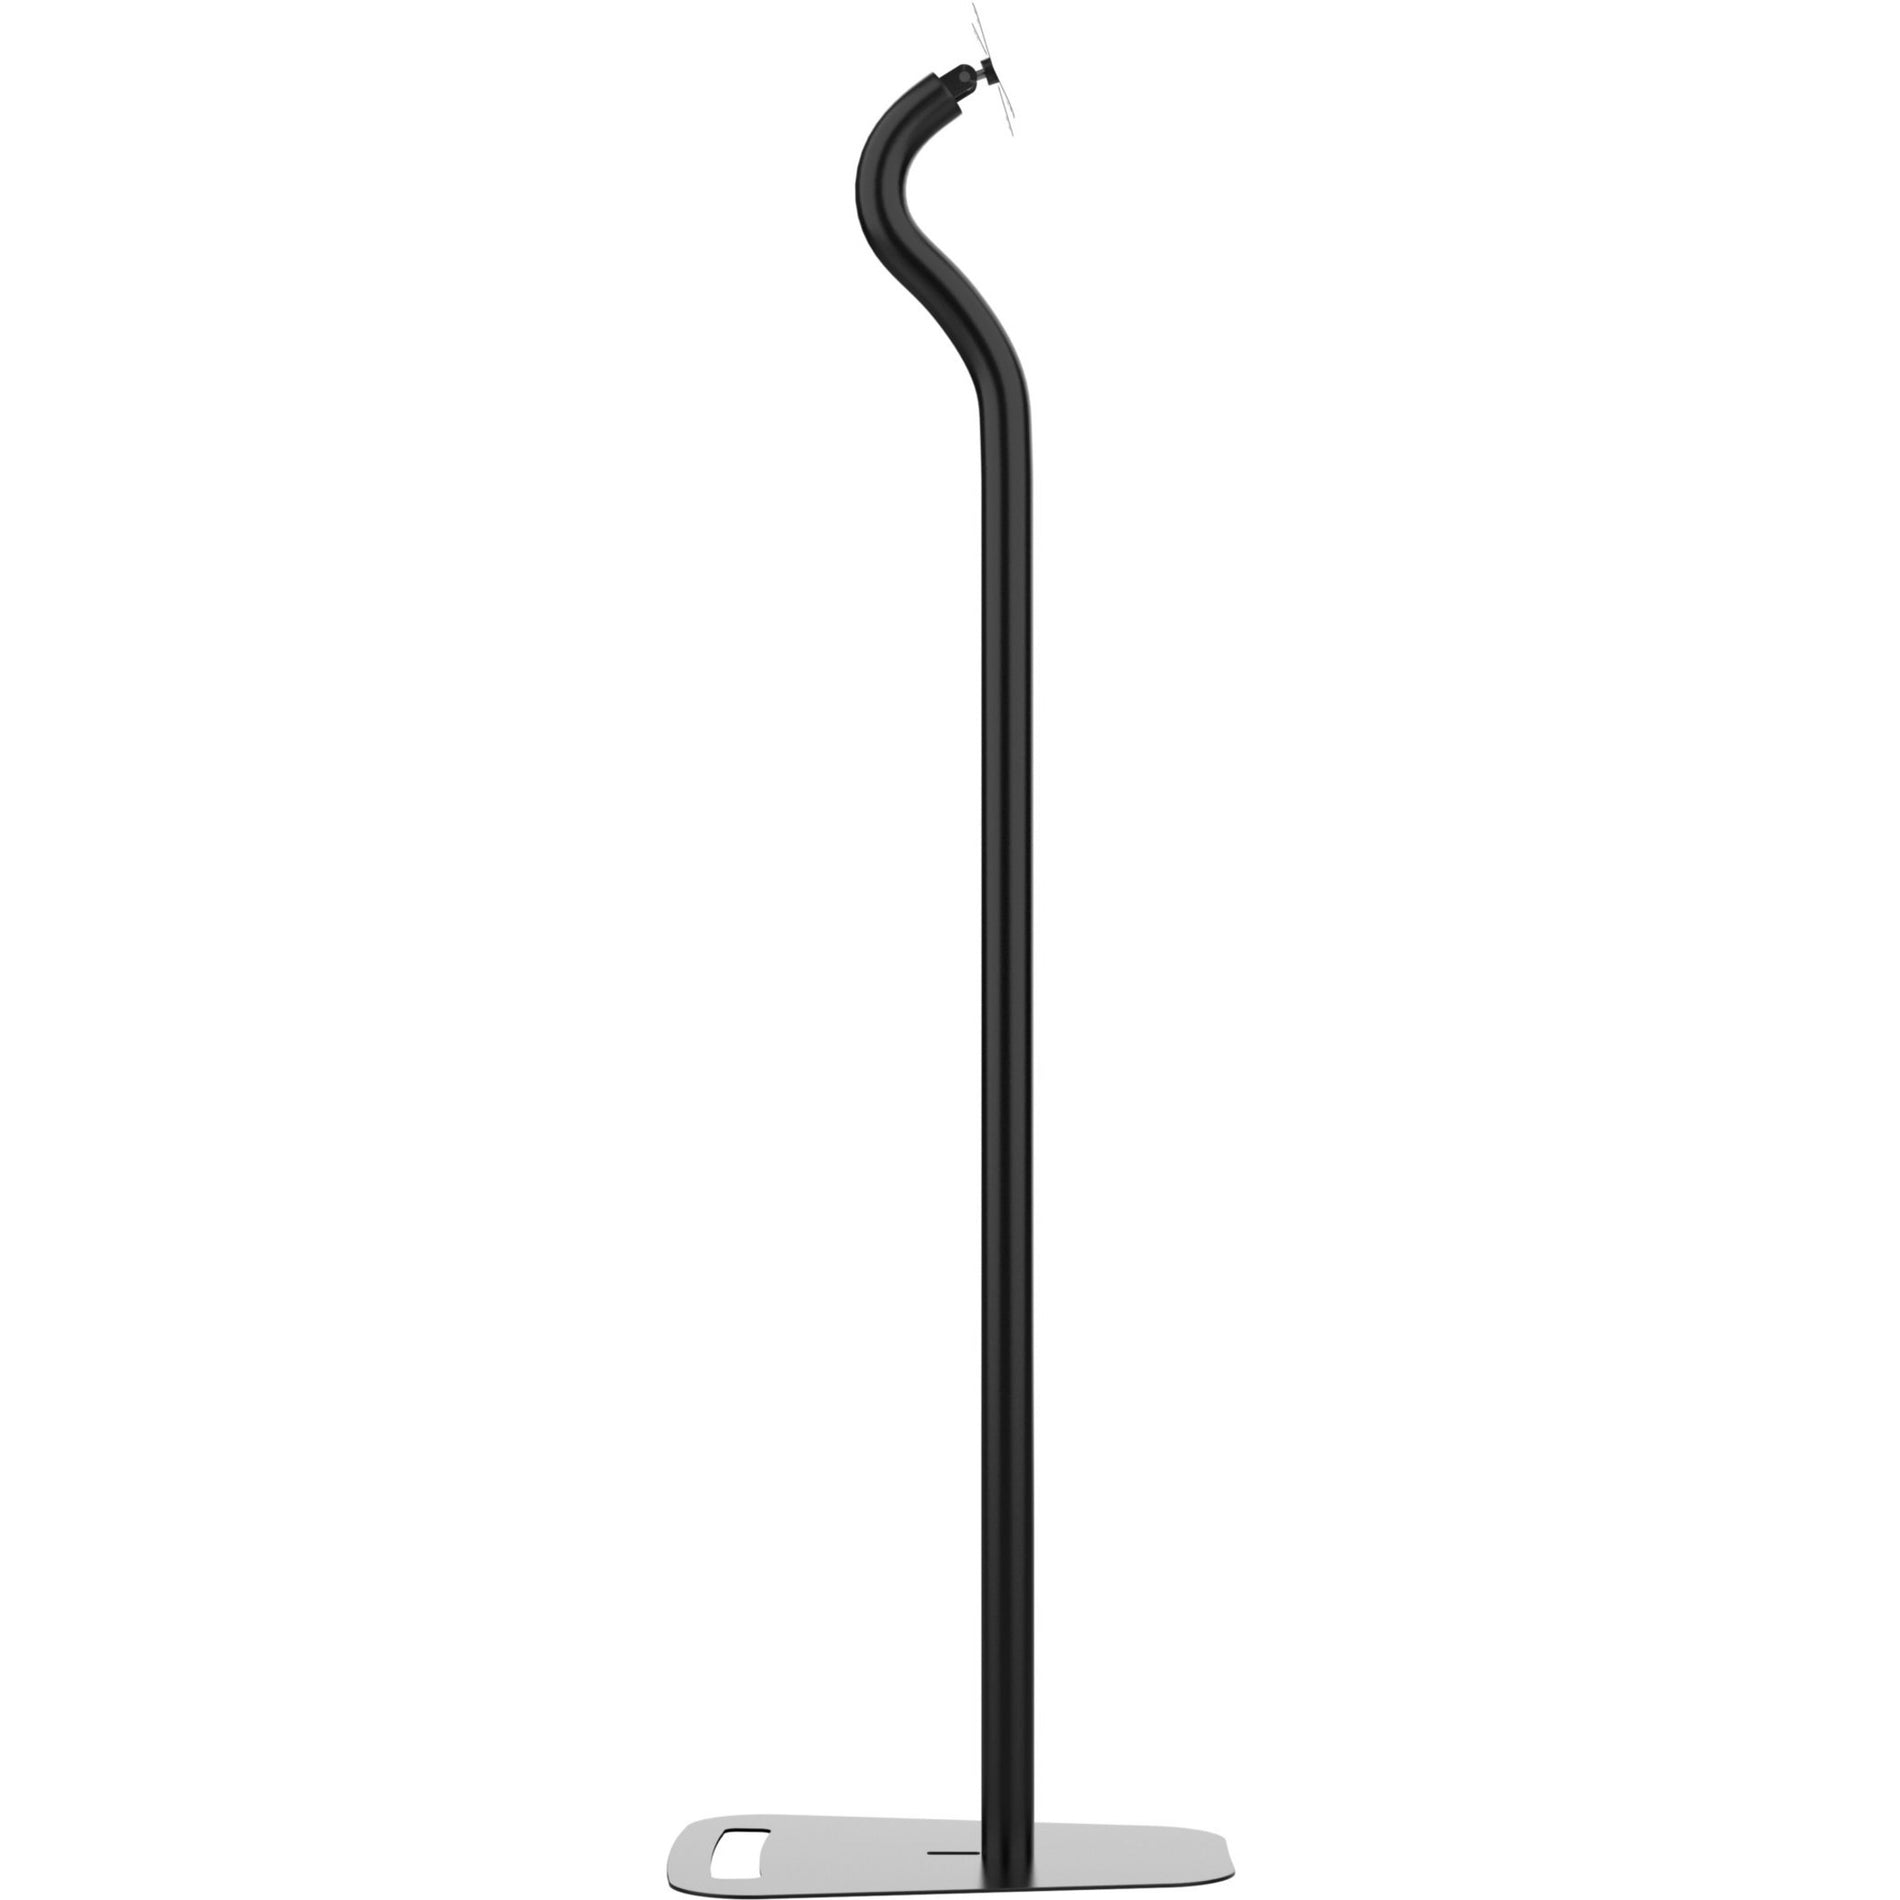 CTA Digital ADD-PARASW Premium Security Swan Neck Floor Stand with VESA Plate, Heavy Duty, Lockable, Scratch Resistant, 90° Rotation, Cable Management